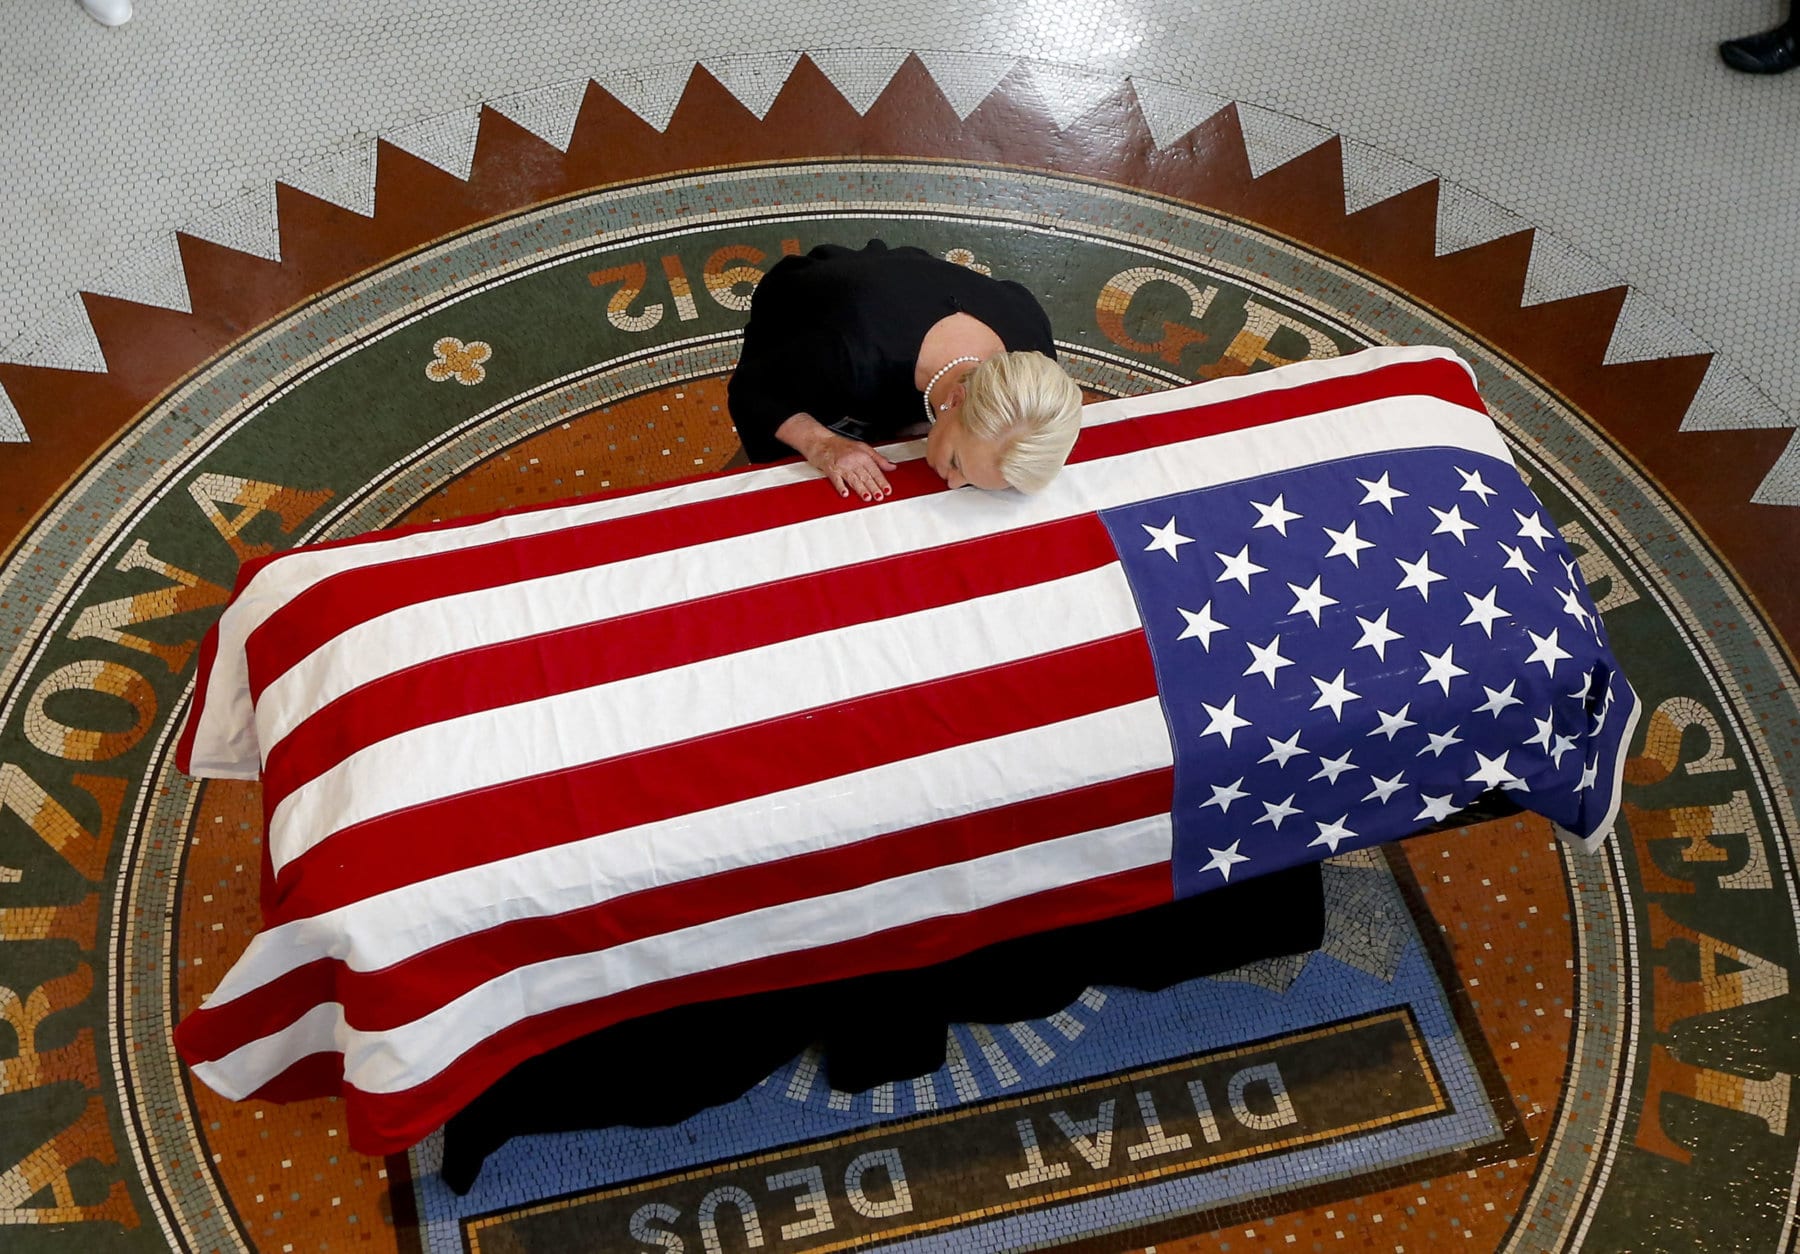 Cindy McCain, wife of Sen. John McCain, R-Ariz., rests her head on his casket during a memorial service at the Arizona Capitol in Phoenix on Aug. 29, 2018. (AP Photo/Ross D. Franklin)